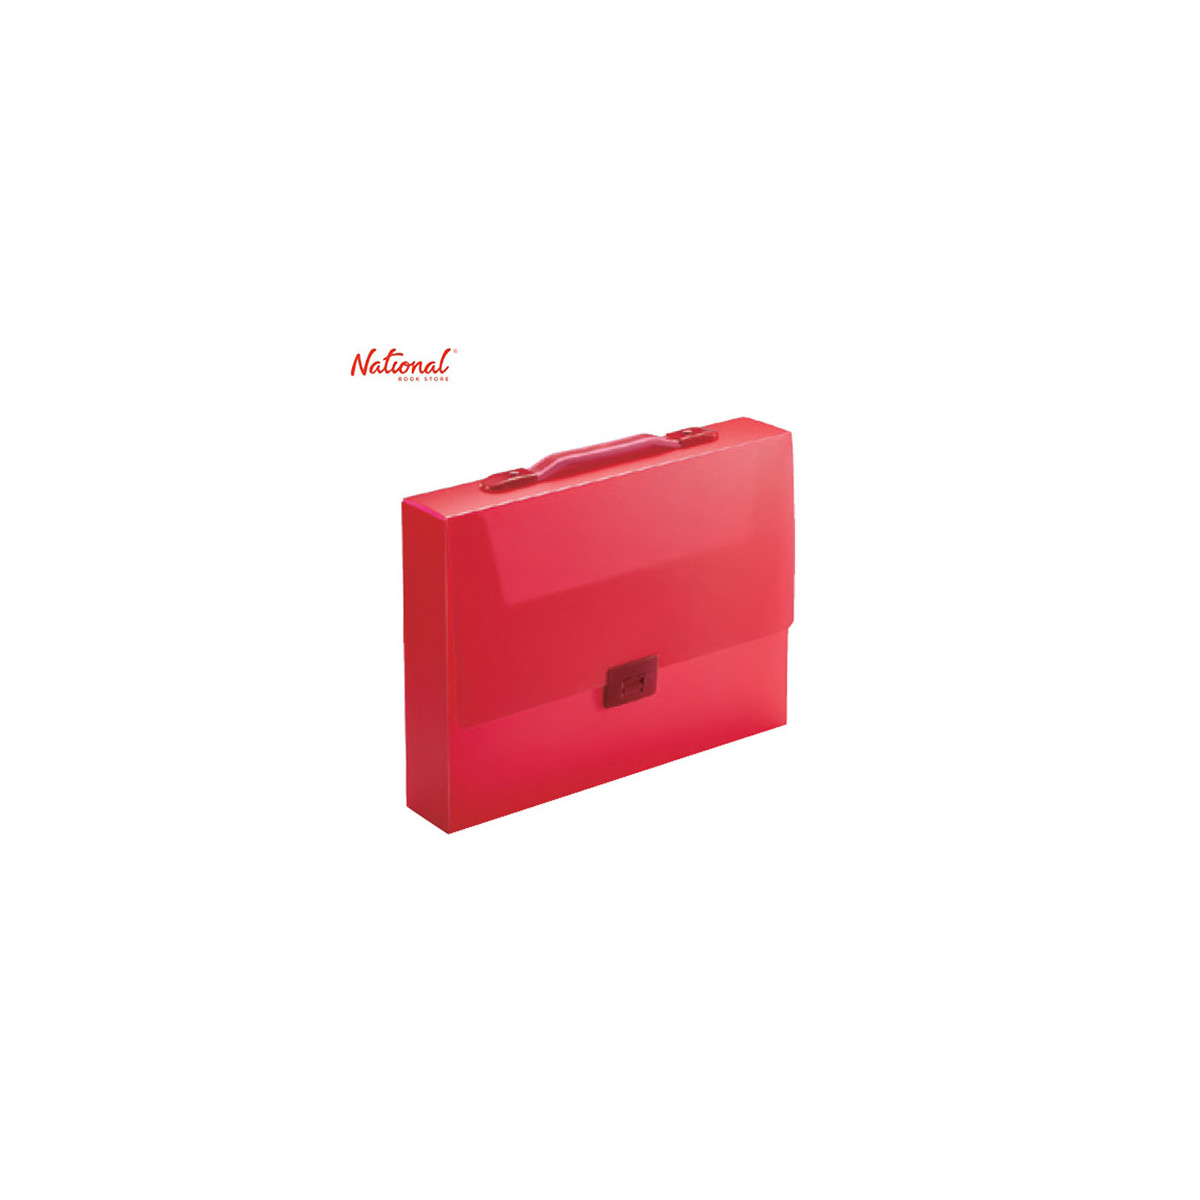 PORTFOLIO FILE CASE  WITH HANDLE P282 A4, RED